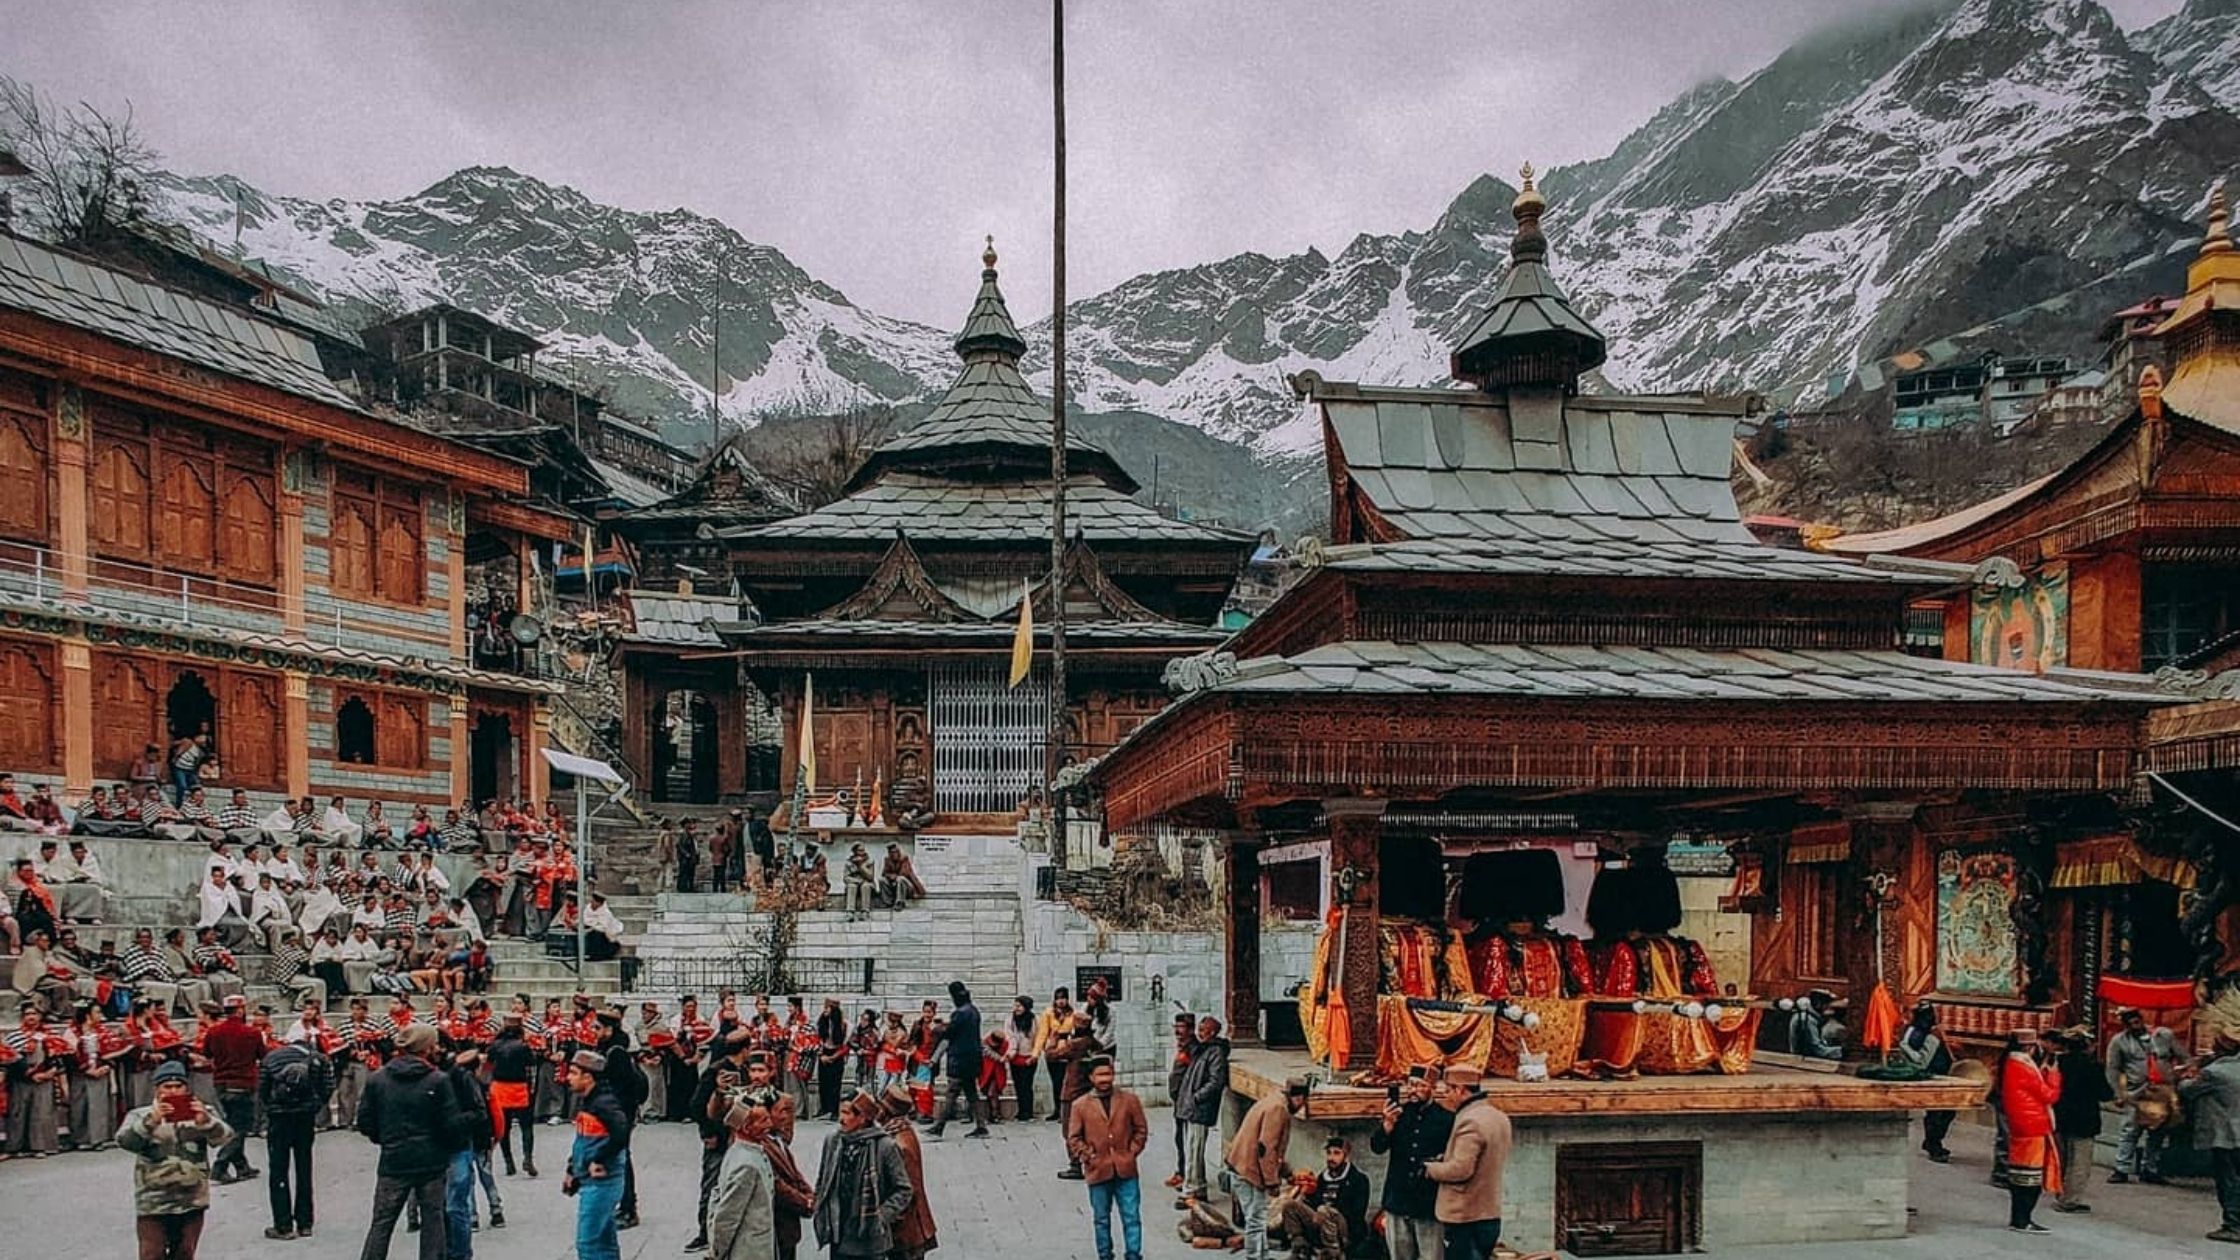 Sangla Celebrates Holi Better Than Any Other Place | Insta Himachal